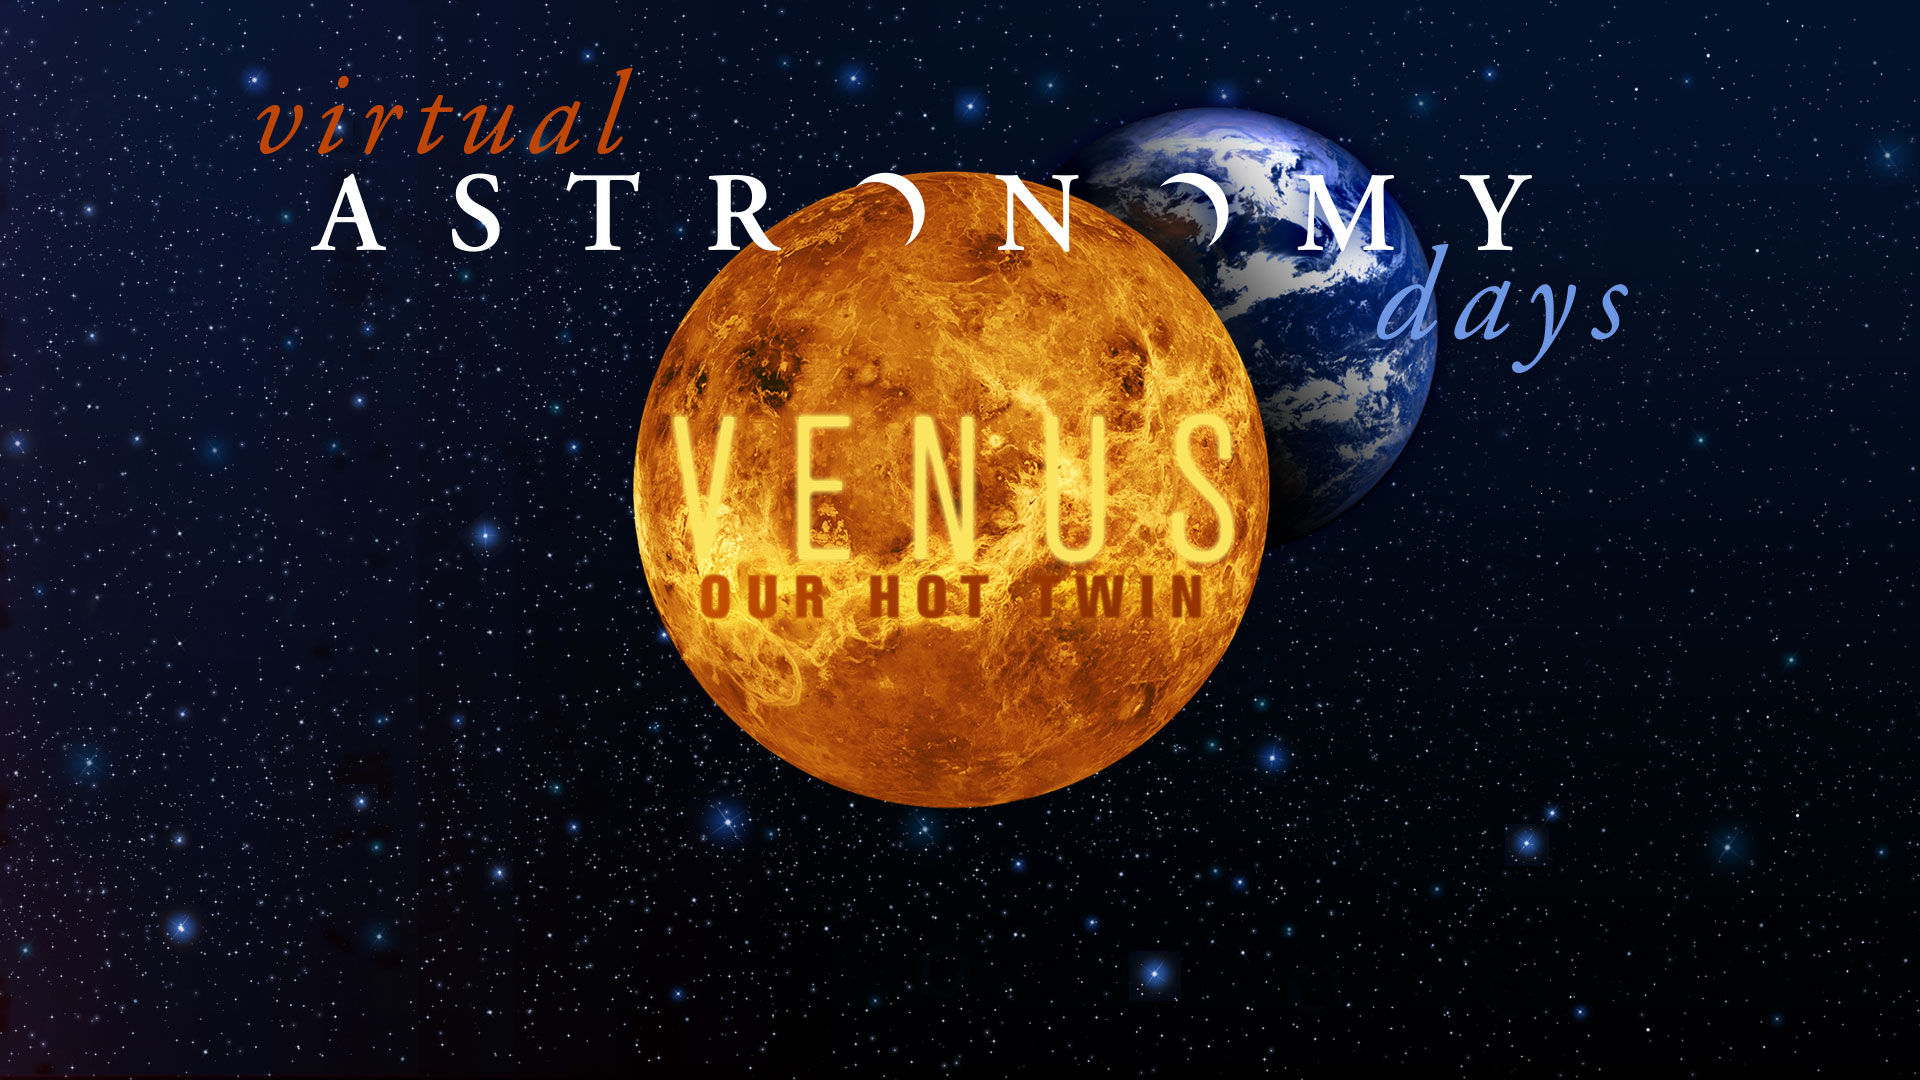 Astronomy Days: Venus, Our Hot Twin, January 24–30